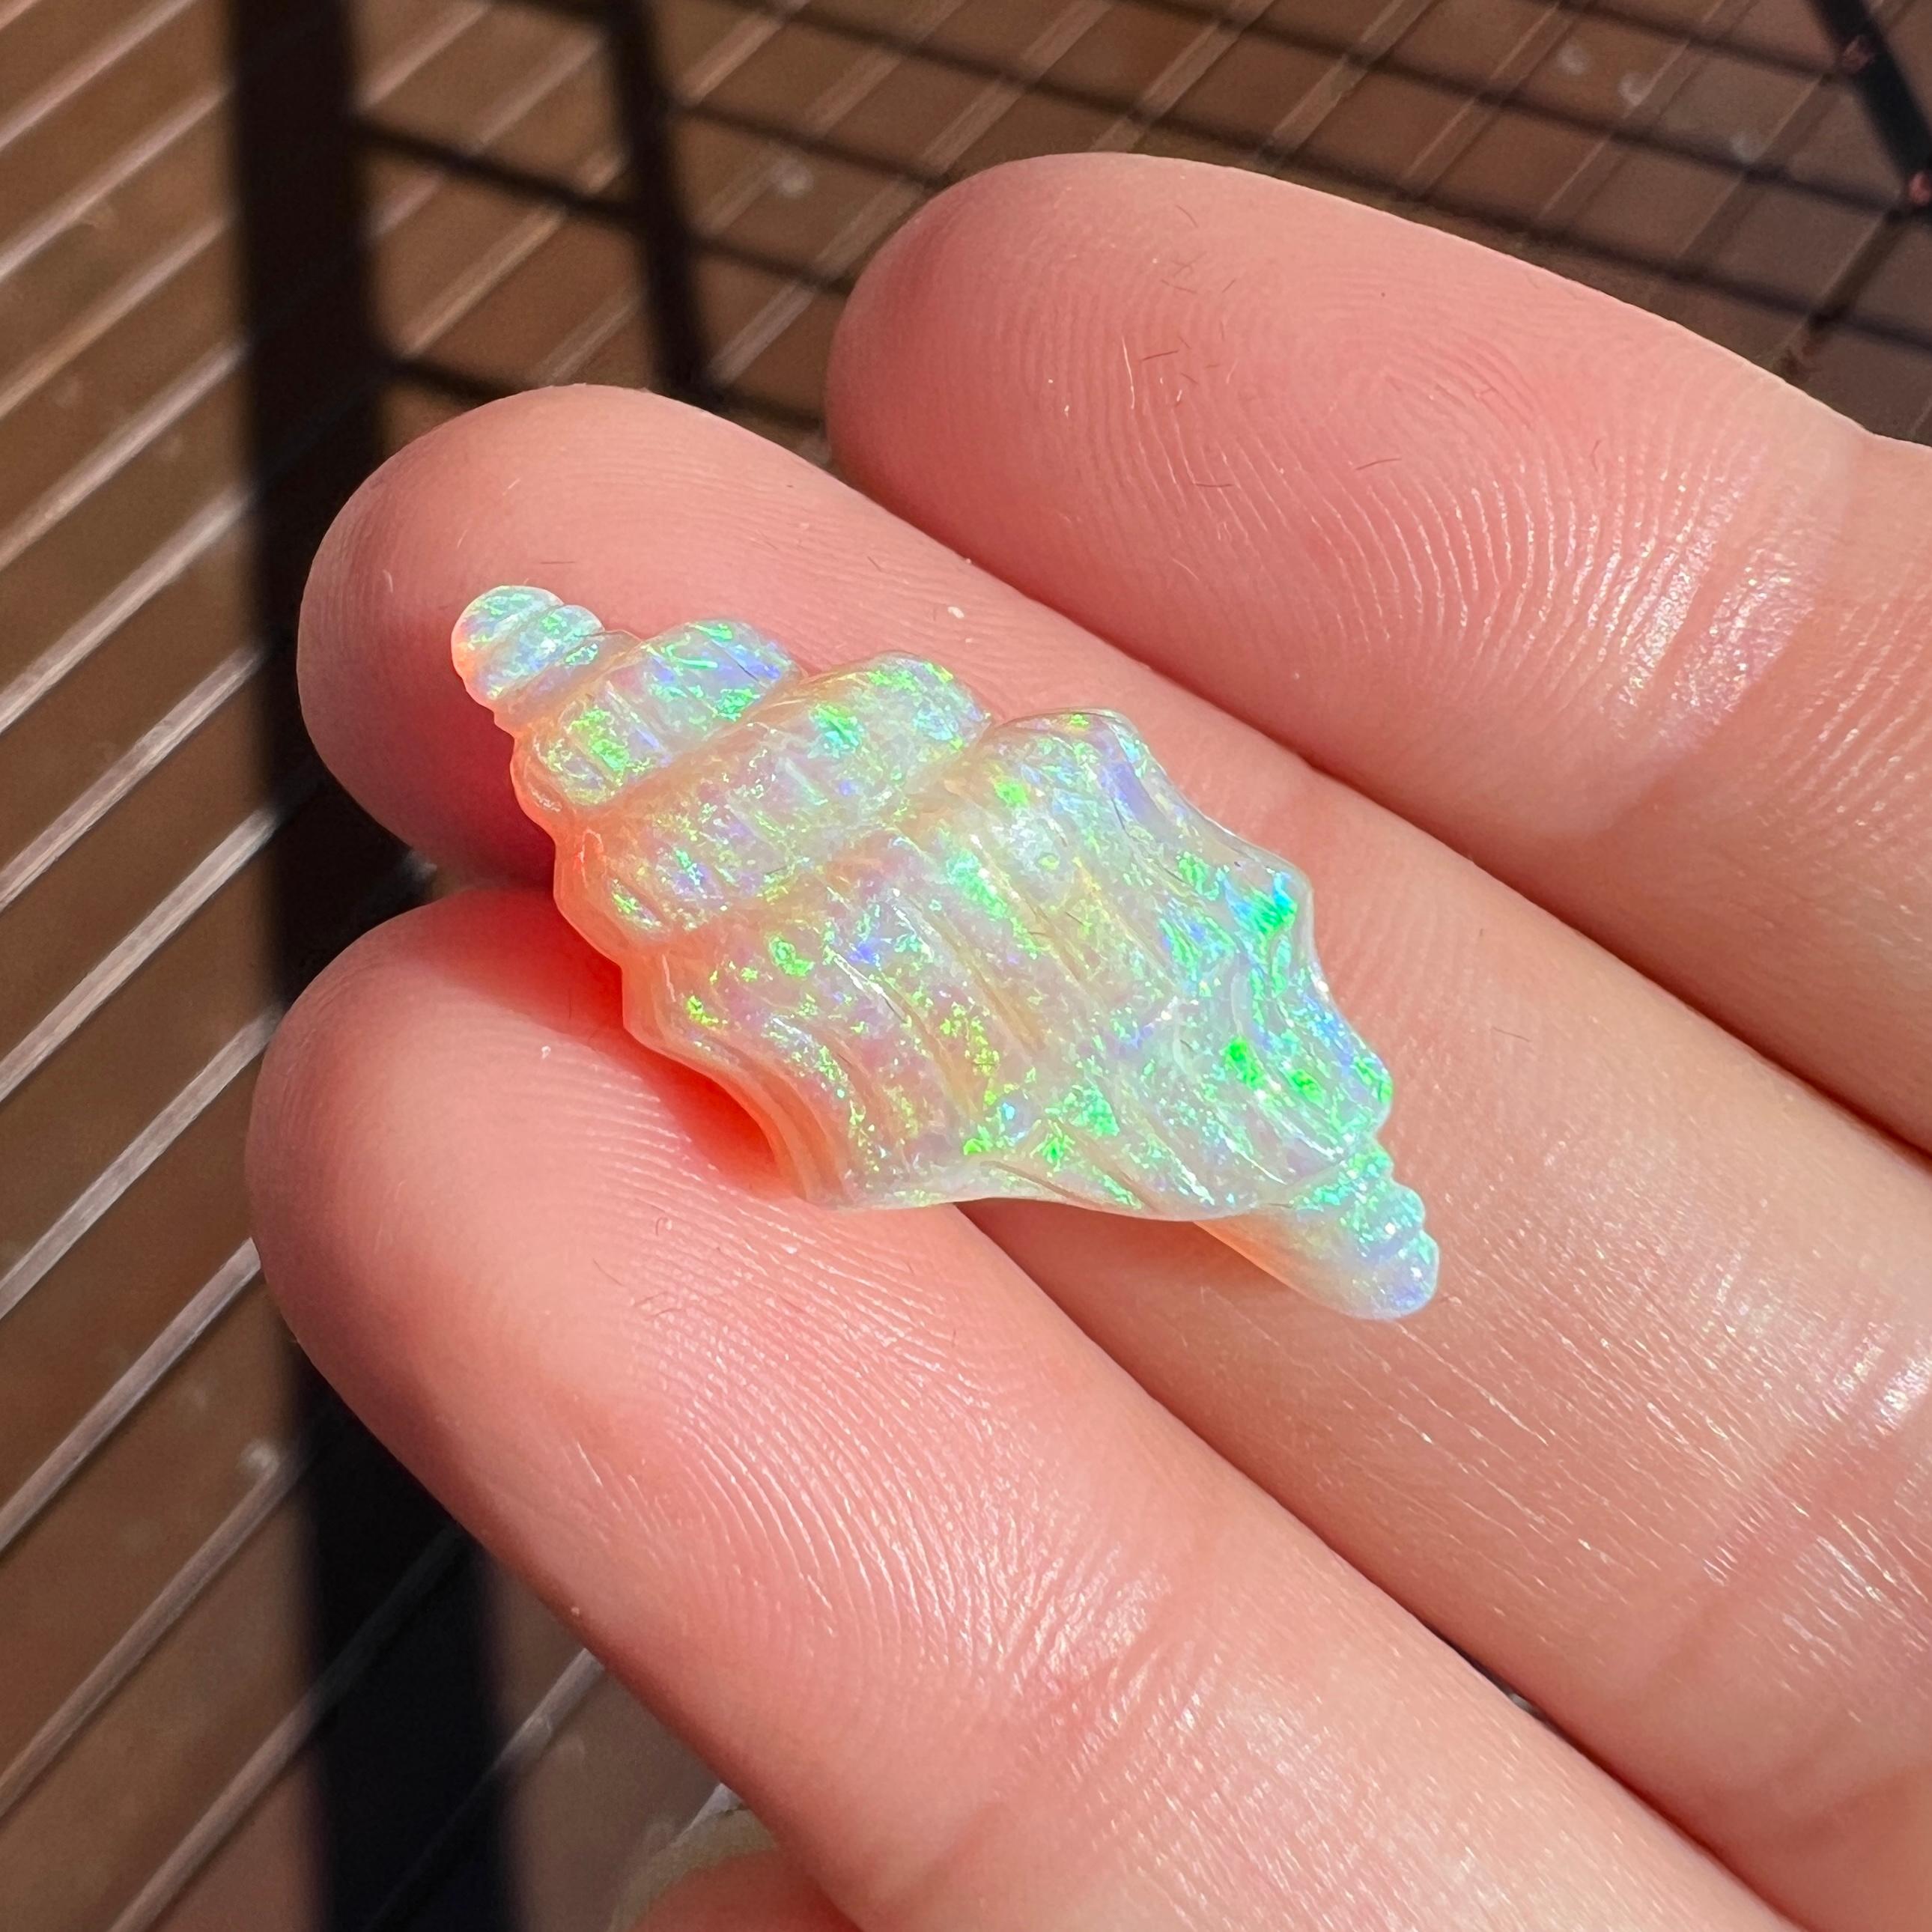 This beautiful 9.47 Ct Australian gem crystal opal, carved into a conch shell, is a truly exceptional addition to any collection, mined by Sue Cooper herself. Its rarity, coupled with the amazing shell carving, captivates connoisseurs with its